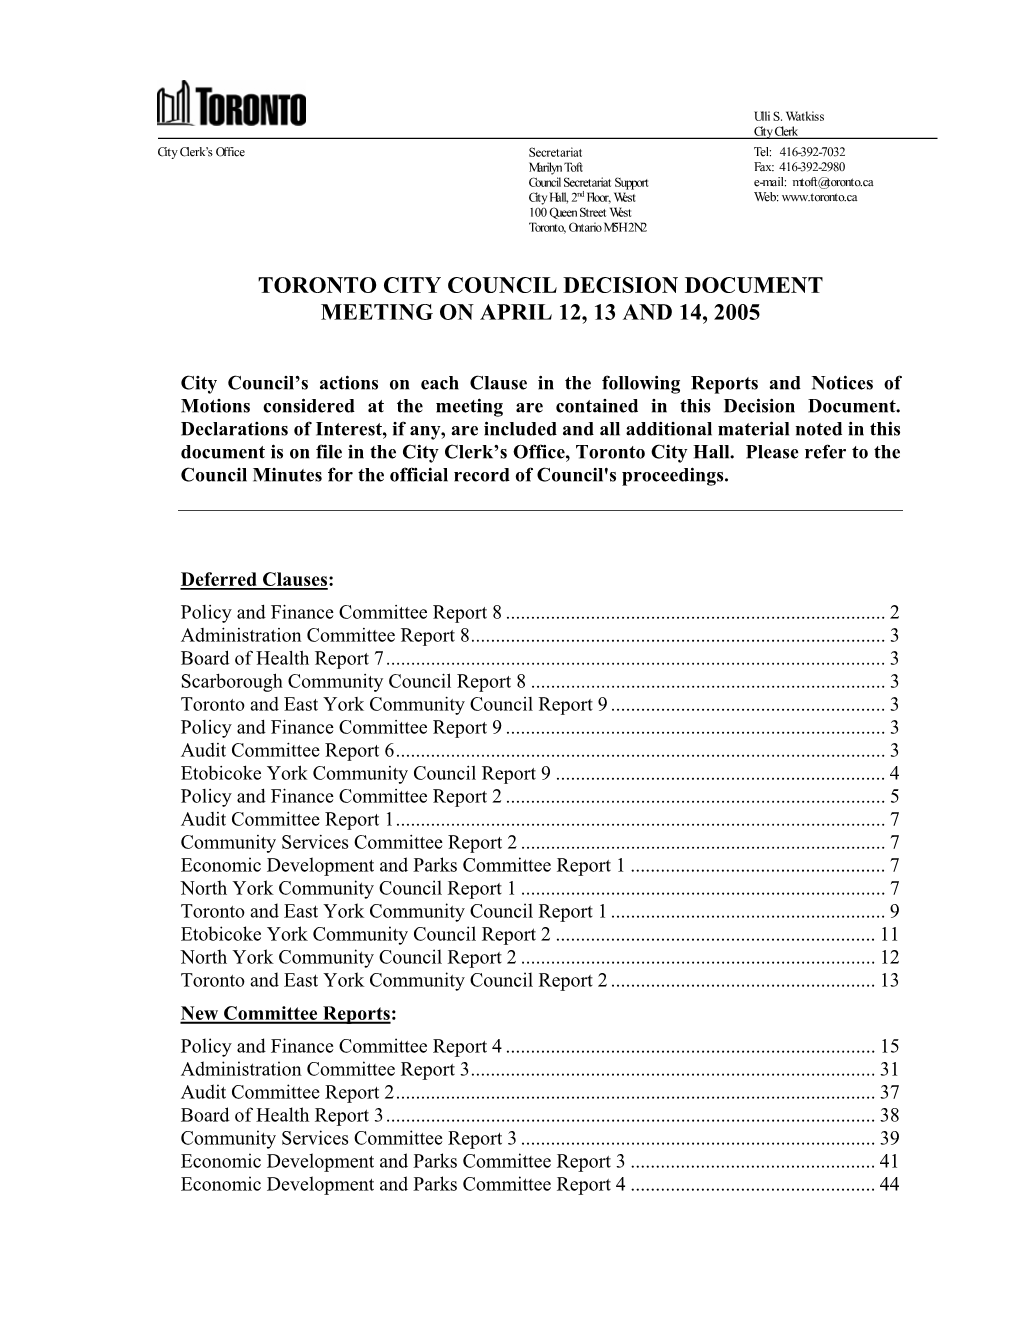 City Council Decision Document Meeting on April 12, 13 and 14, 2005